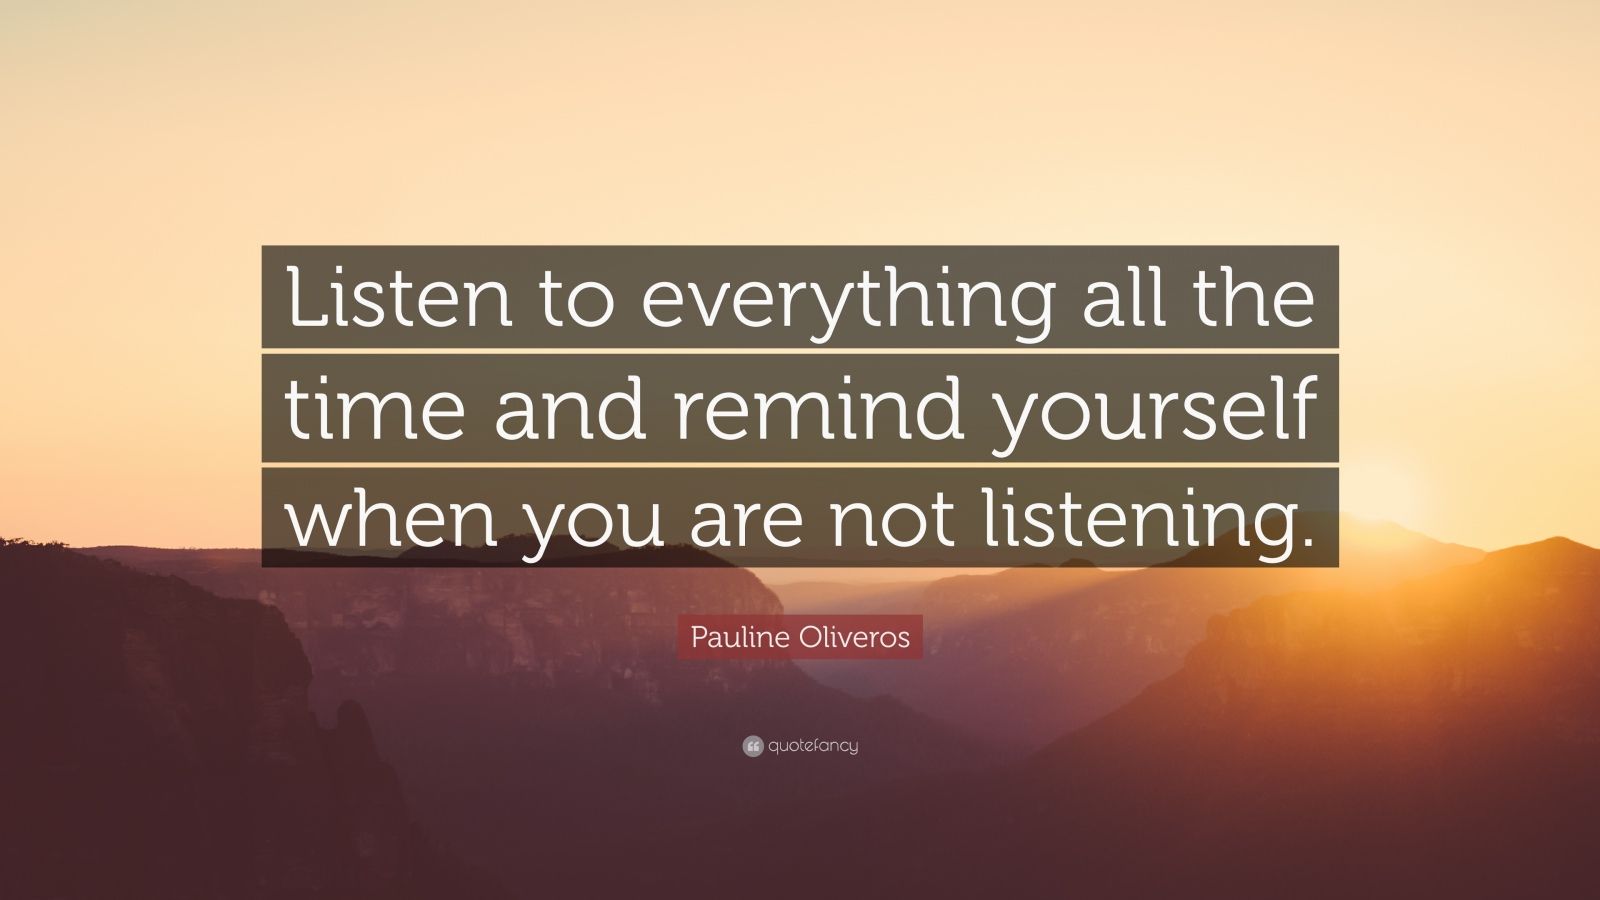 Pauline Oliveros Quote: “Listen to everything all the time and remind ...